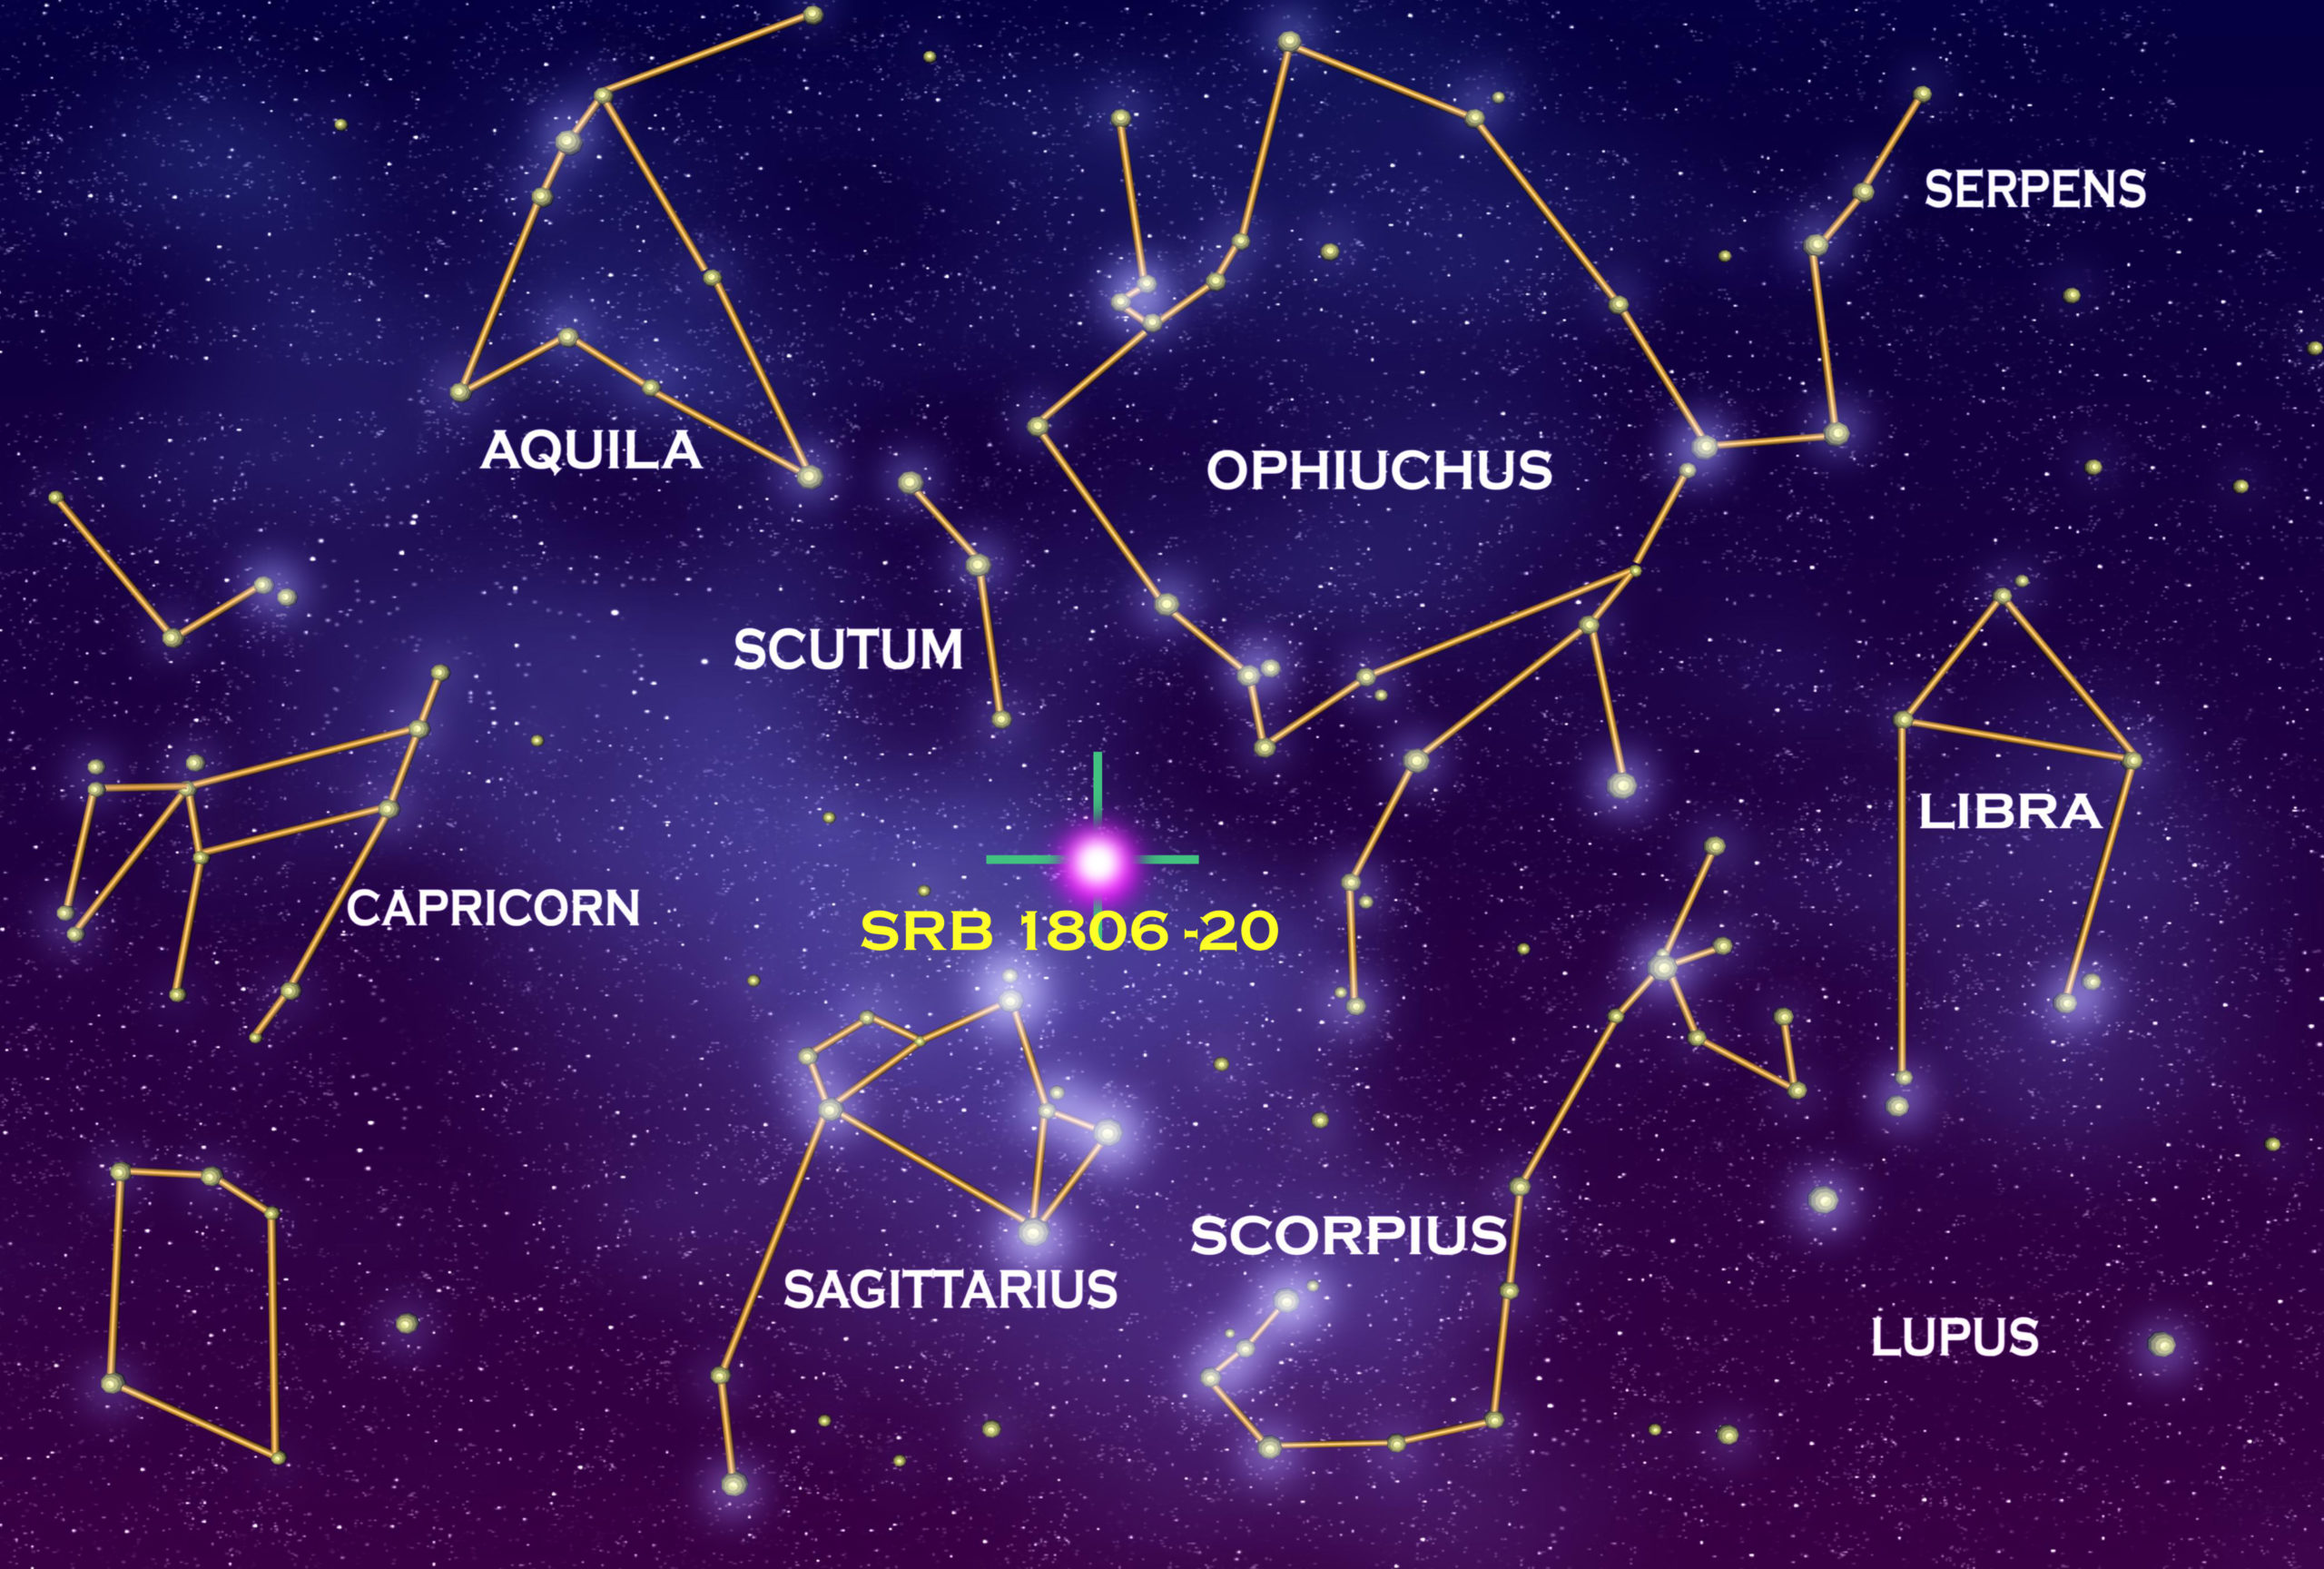 Constellations sometimes resemble humans and animals